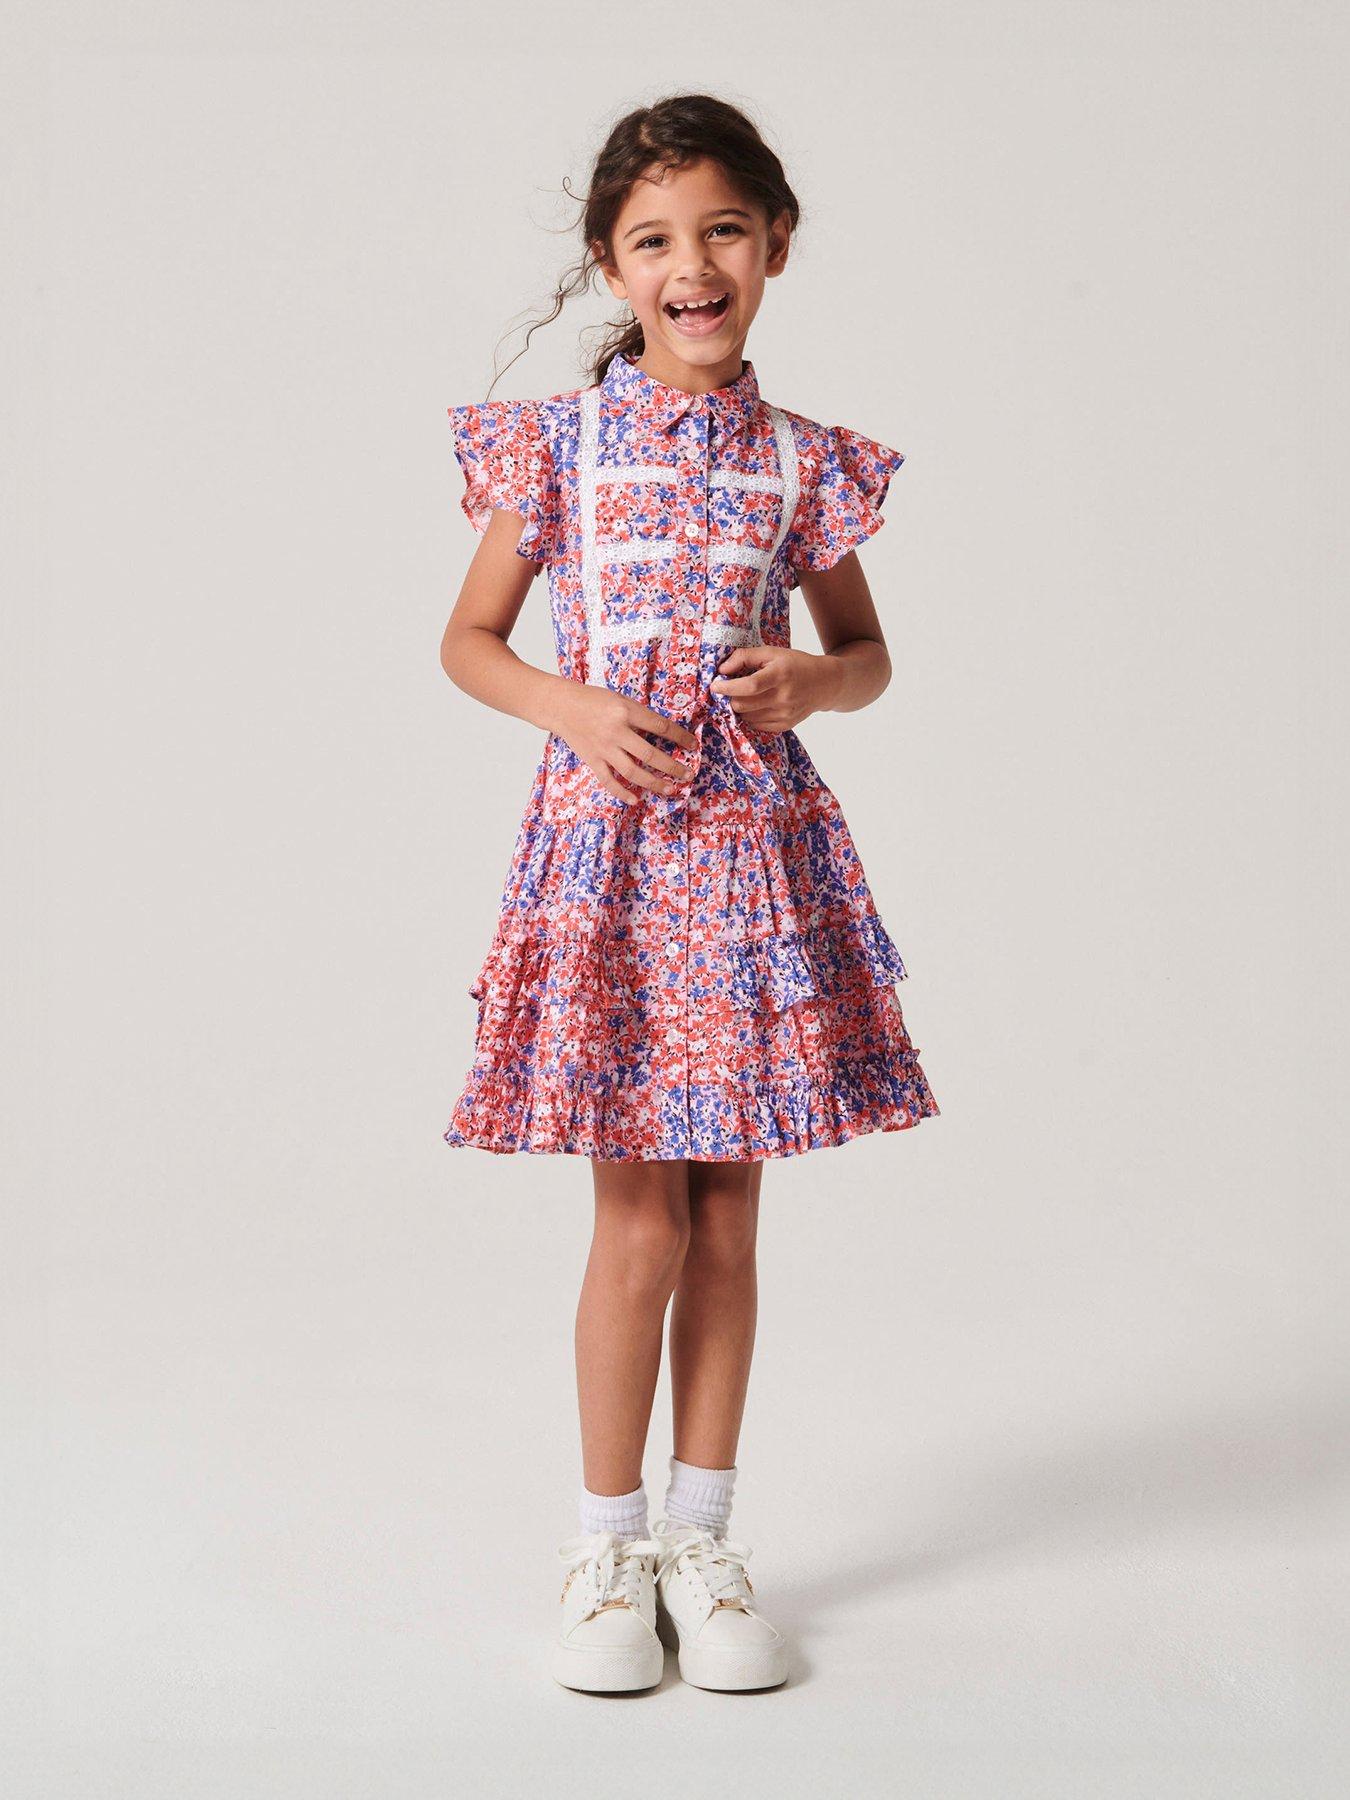 Girls Fancy Party Dress - 26 Age Group: 1-9 Years at Best Price in Kolkata  | Berries Fashion